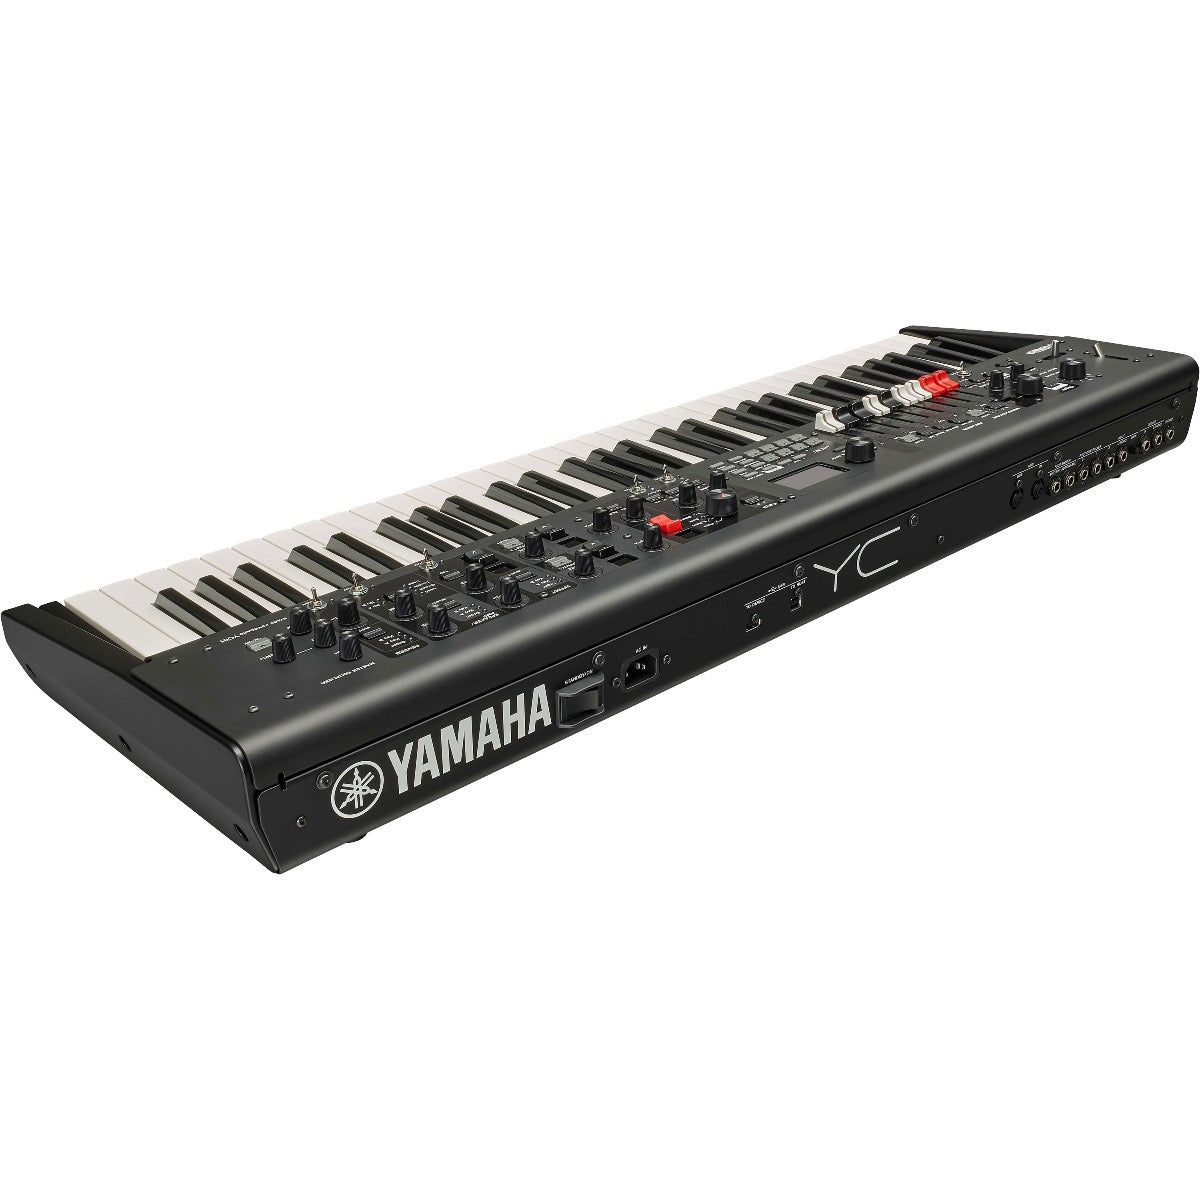 3/4 view of Yamaha YC61 Stage Keyboard and Organ showing rear, top and right side